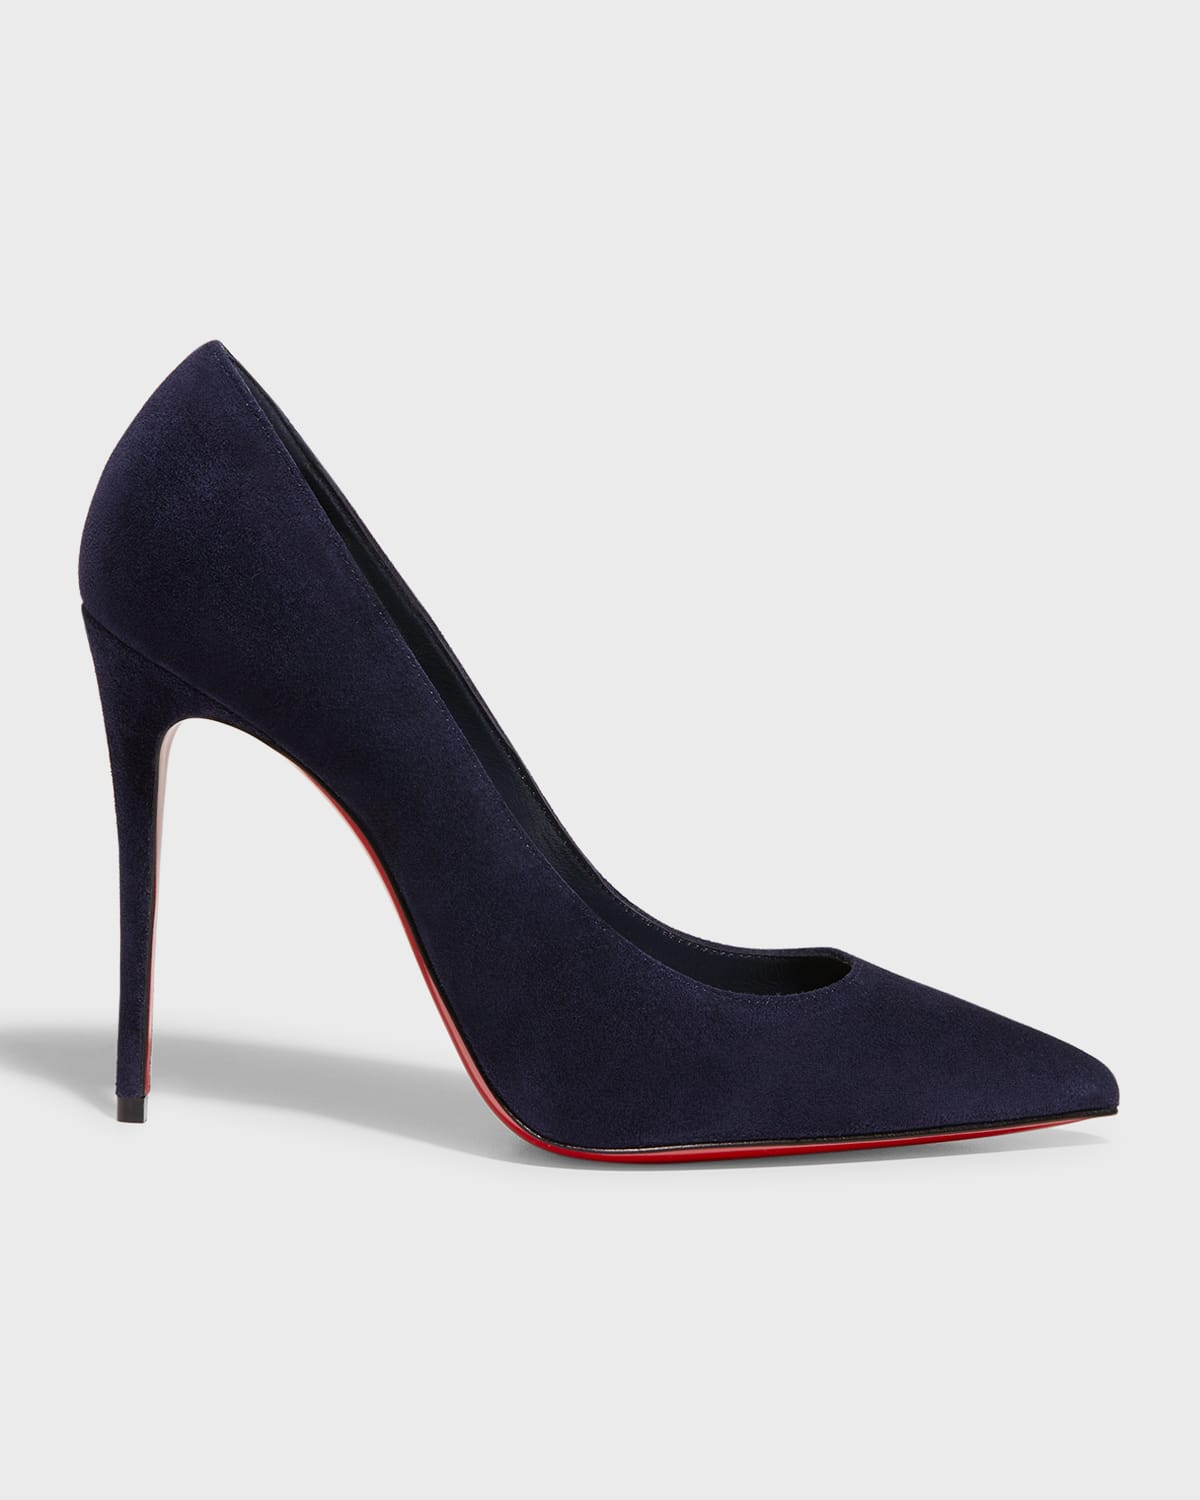 Christian Louboutin Kate 100mm Red Sole Leather Pumps